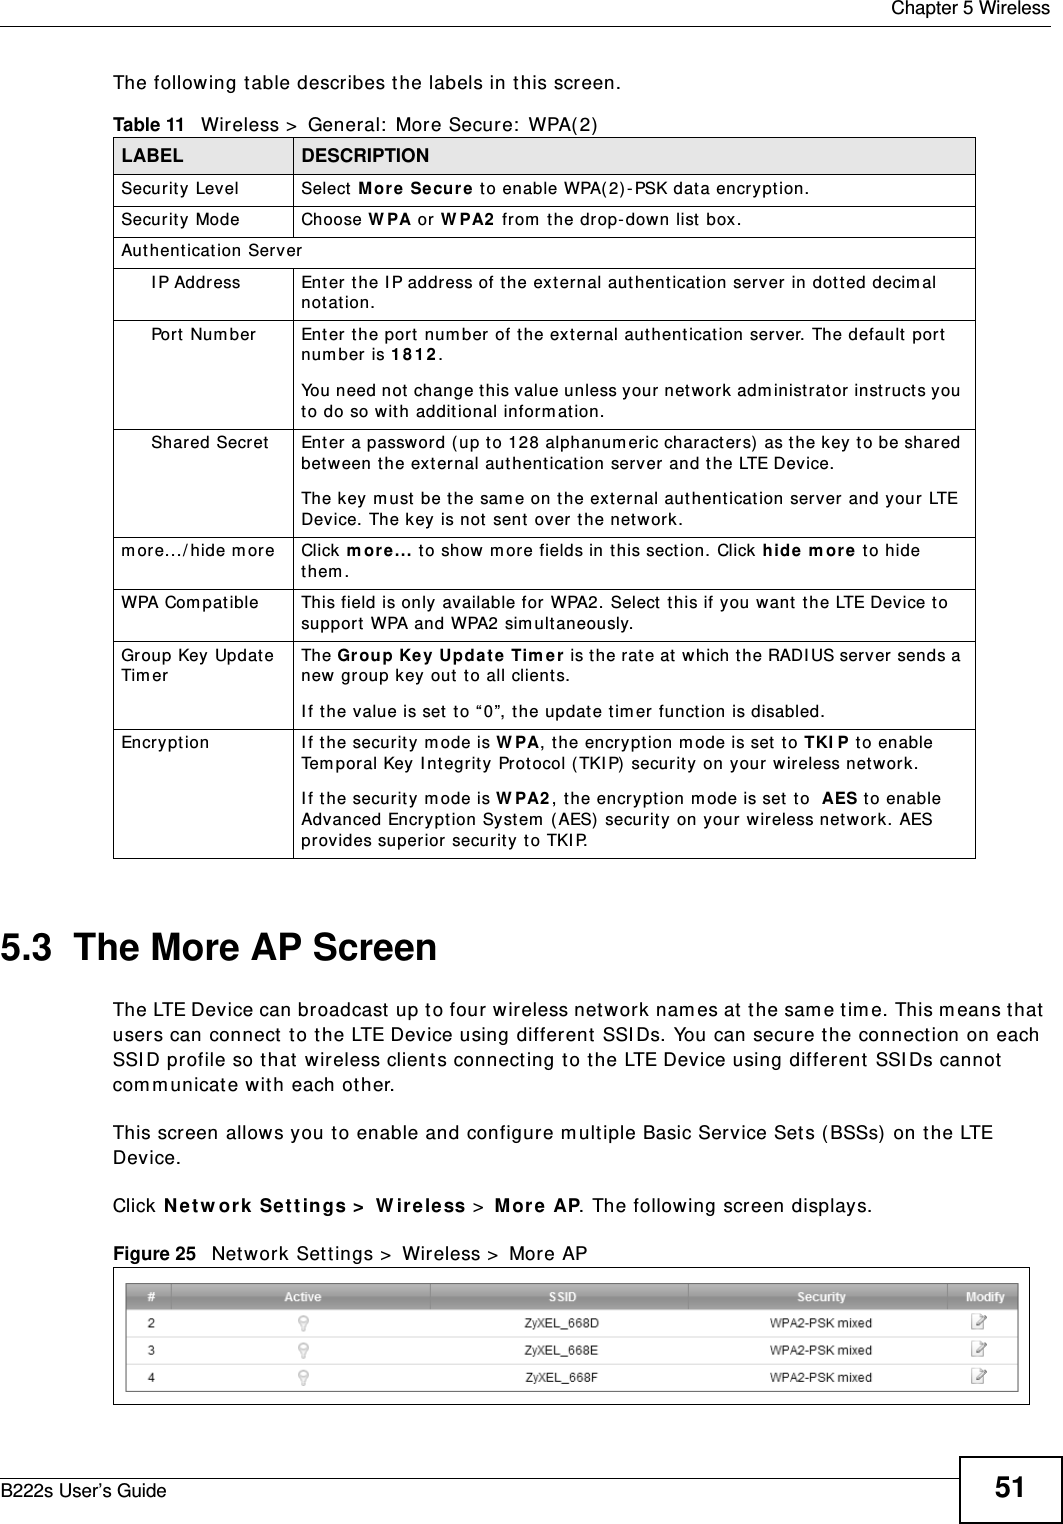  Chapter 5 WirelessB222s User’s Guide 51The following t able describes t he labels in t his screen.5.3  The More AP ScreenThe LTE Device can broadcast  up to four wireless net w ork nam es at  t he sam e t im e. This m eans t hat  users can connect t o t he LTE Device using different SSI Ds. You can secure t he connection on each SSI D pr ofile so t hat  wireless client s connecting t o t he LTE Device using different SSI Ds cannot com municate with each ot her.This screen allows you t o enable and configure m ult iple Basic Service Sets ( BSSs)  on t he LTE Device.Click N et w or k  Set t ings &gt;  W ireless &gt;  M or e  AP. The following screen displays.Figure 25   Net work Set tings &gt;  Wireless &gt;  More APTable 11   Wireless &gt;  General:  More Secure:  WPA( 2)LABEL DESCRIPTIONSecurit y Level Select M ore  Secur e t o enable WPA( 2) - PSK data encryption.Securit y Mode Choose W PA or W PA2  from  t he drop- down list box .Aut hent icat ion Serv erI P Address Ent er the I P address of t he ext ernal aut hent icat ion server in dott ed decim al not at ion.Port  Nu m ber Ent er t he port num ber of the ext ernal aut hent icat ion server. The default port num ber is 1 8 1 2 . You need not change t his value unless your network adm inist rat or inst ructs you to do so w ith addit ional inform at ion. Shared Secret Enter a password ( up t o 128 alphanum eric charact ers) as t he key t o be shared bet ween t he ext ernal aut hent icat ion serv er and t he LTE Device.The key  m ust be t he sam e on t he ext ernal authentication server and your LTE Device. The key is not  sent  over t he net work. m ore.../ hide m ore Click m or e ... t o show m or e fields in t his section. Click hide m ore  to hide t hem .WPA Com pat ible This field is only available for  WPA2. Select  this if you want t he LTE Device to support  WPA and WPA2 sim ult aneously.Group Key Update Tim erThe Gr oup Key Upda t e Tim er  is the rate at which the RADI US server sends a new group key out  t o all client s. I f t he value is set  t o “ 0”, the update t im er function is disabled.Encrypt ion I f t he security m ode is W PA, the encrypt ion m ode is set  t o TKI P t o enable Tem poral Key I ntegrit y Prot ocol ( TKI P)  securit y on your wireless netw ork. I f t he security  m ode is W PA2 , t he encryption m ode is set  t o  AES to enable Advanced Encrypt ion System  ( AES) securit y on your wireless net work . AES provides superior  securit y to TKI P. 